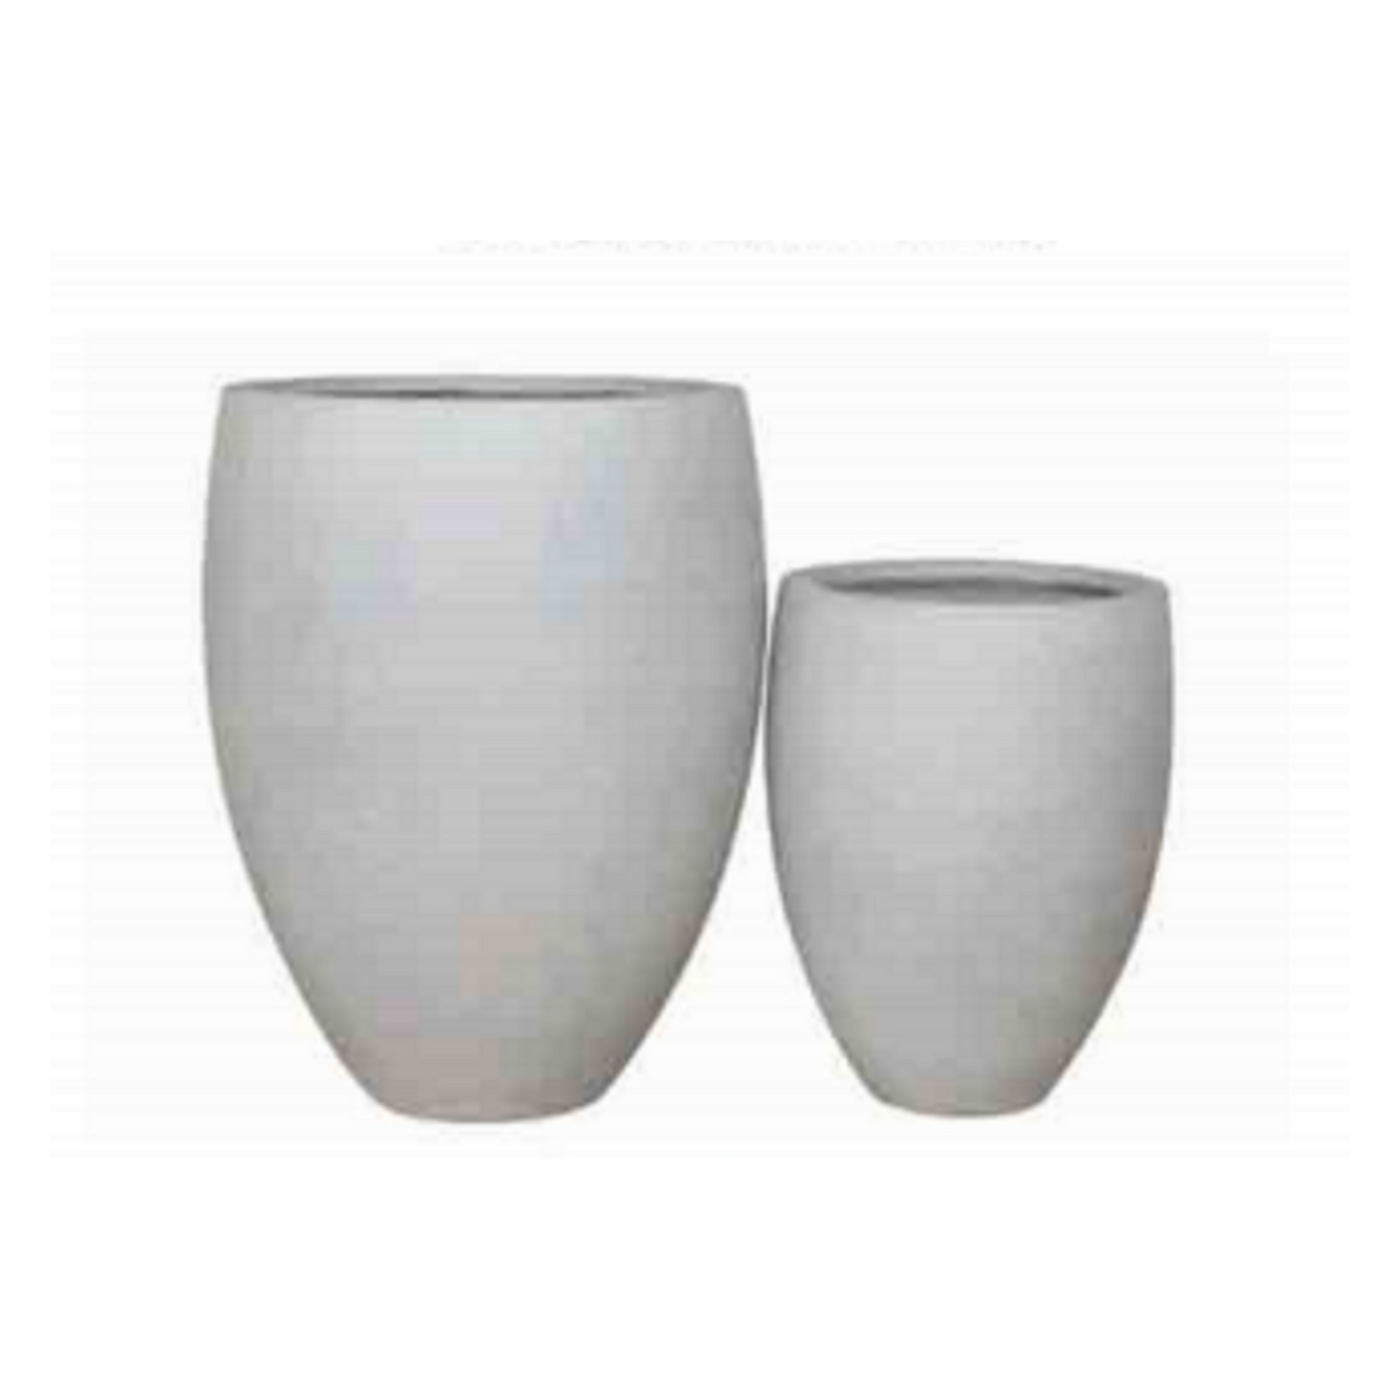 Ficonstone oval outdoor pots